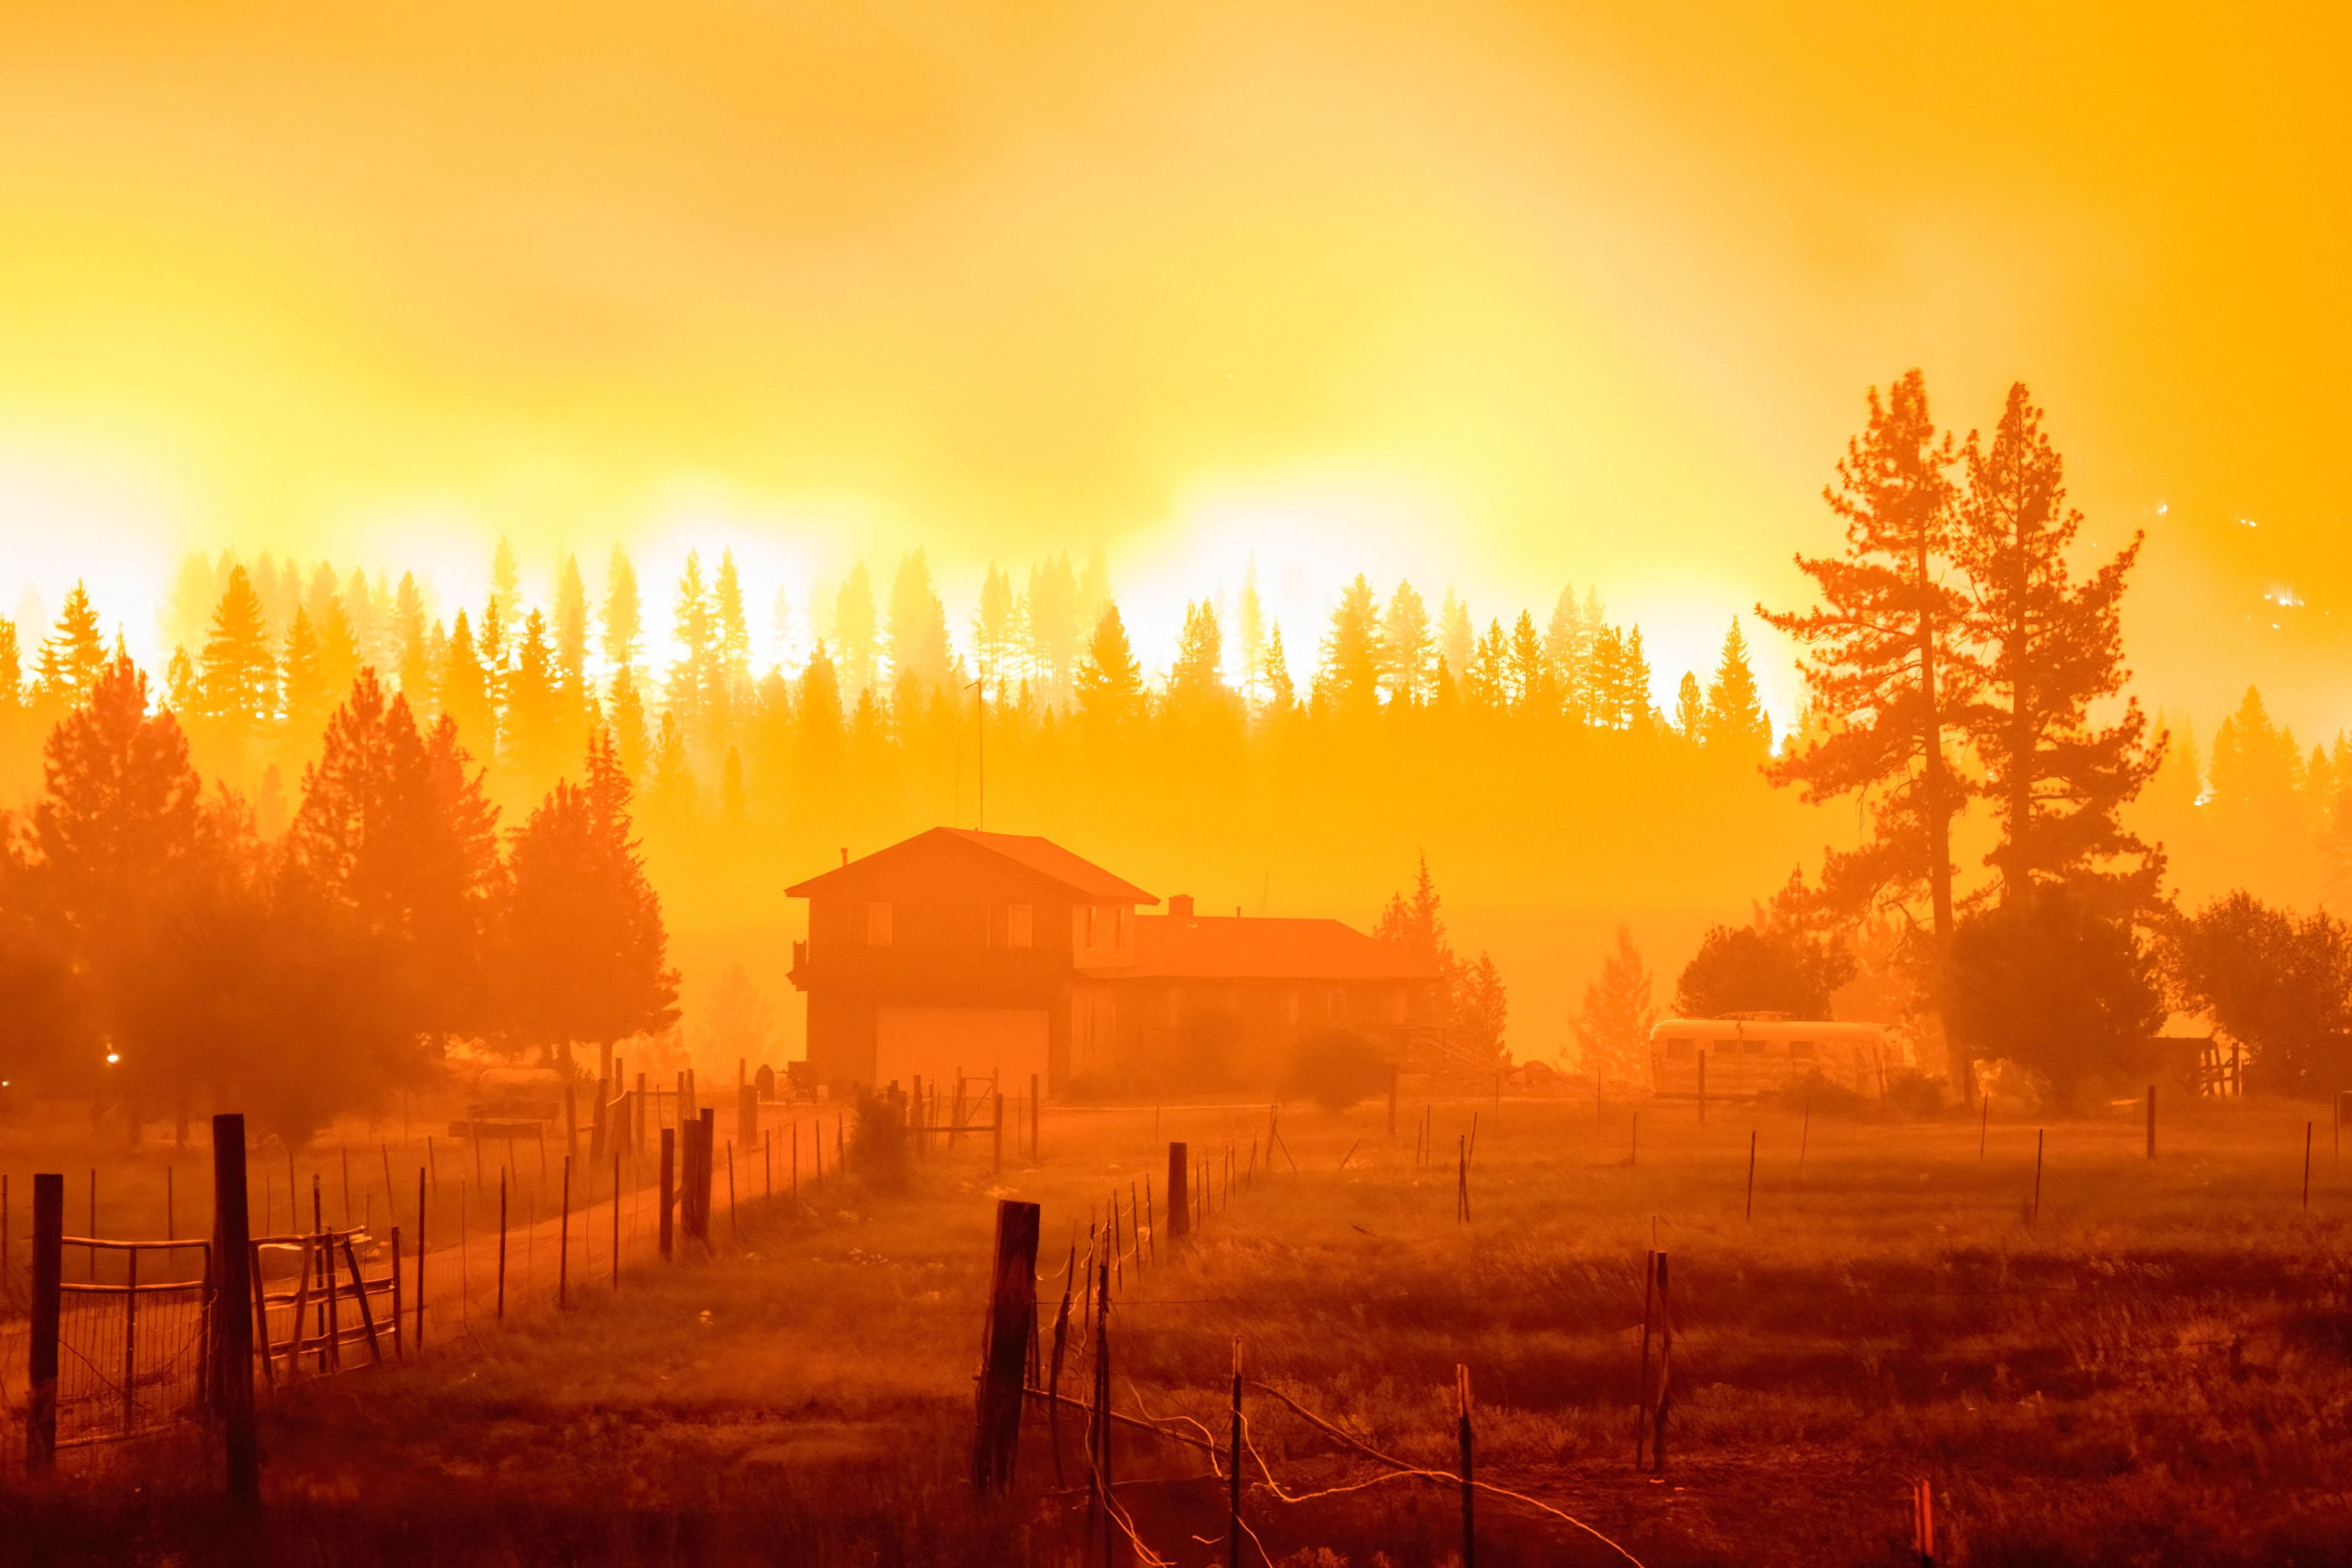 A house stands amidst a smoky field with a blazing forest fire in the background, casting an intense orange glow over the sky and surrounding trees.